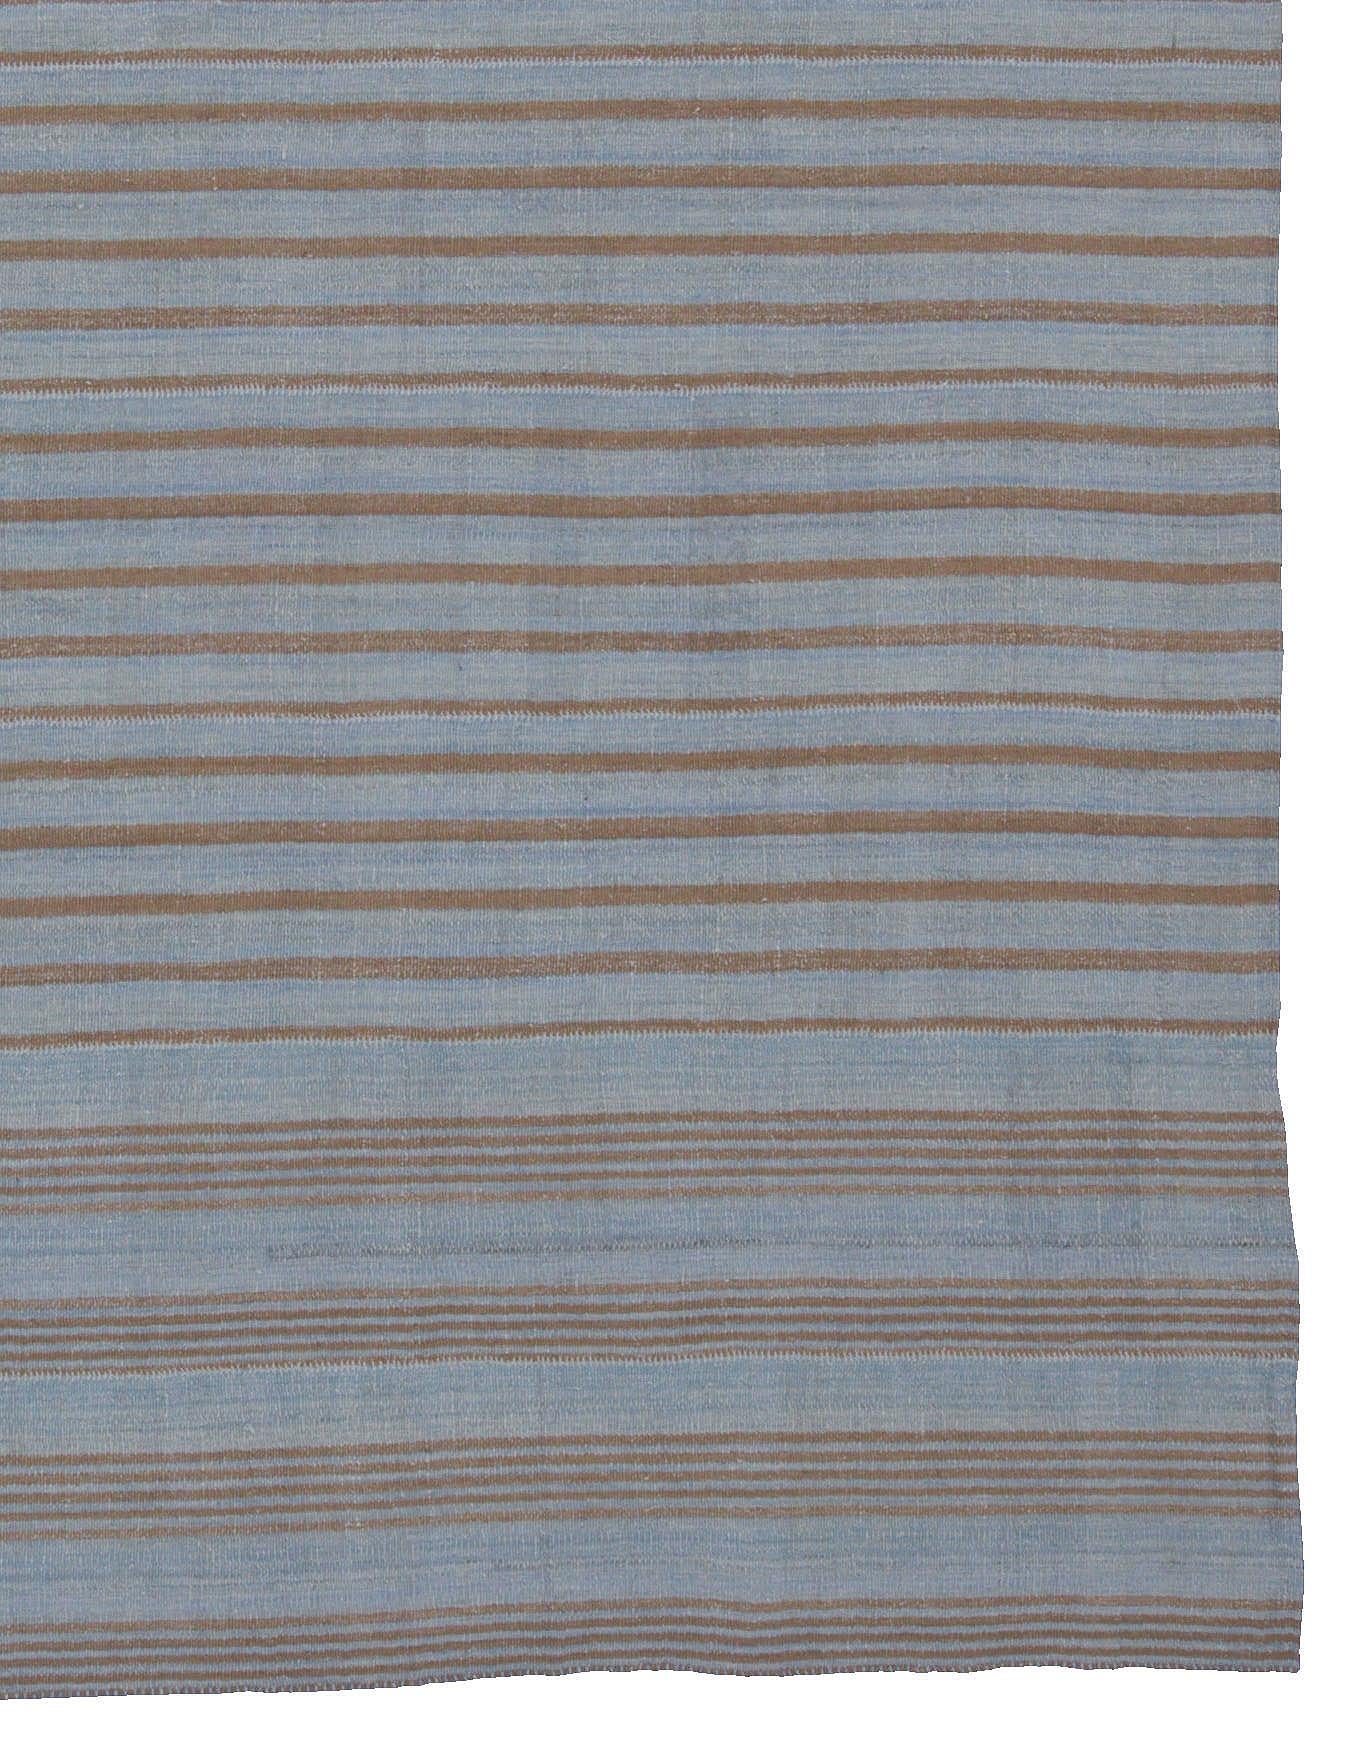 A new production Turkish rug handwoven from the finest sheep’s wool and colored with all-natural vegetable dyes that are safe for humans and pets. It’s a traditional Kilim flat-weave design featuring a robust blue field with brown stripes. It’s a